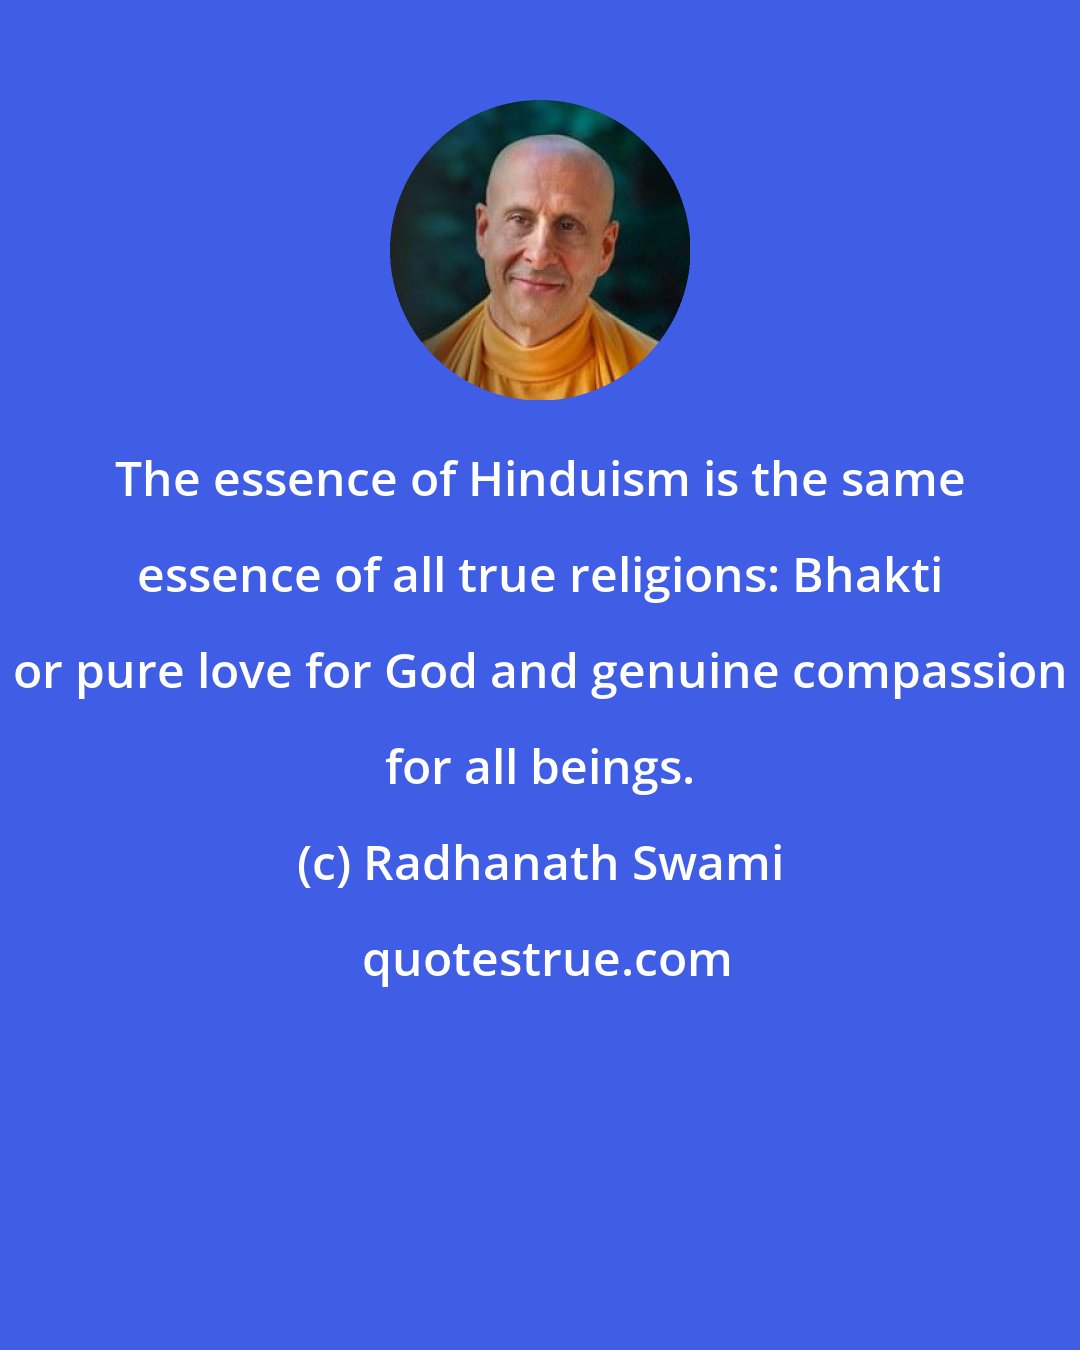 Radhanath Swami: The essence of Hinduism is the same essence of all true religions: Bhakti or pure love for God and genuine compassion for all beings.